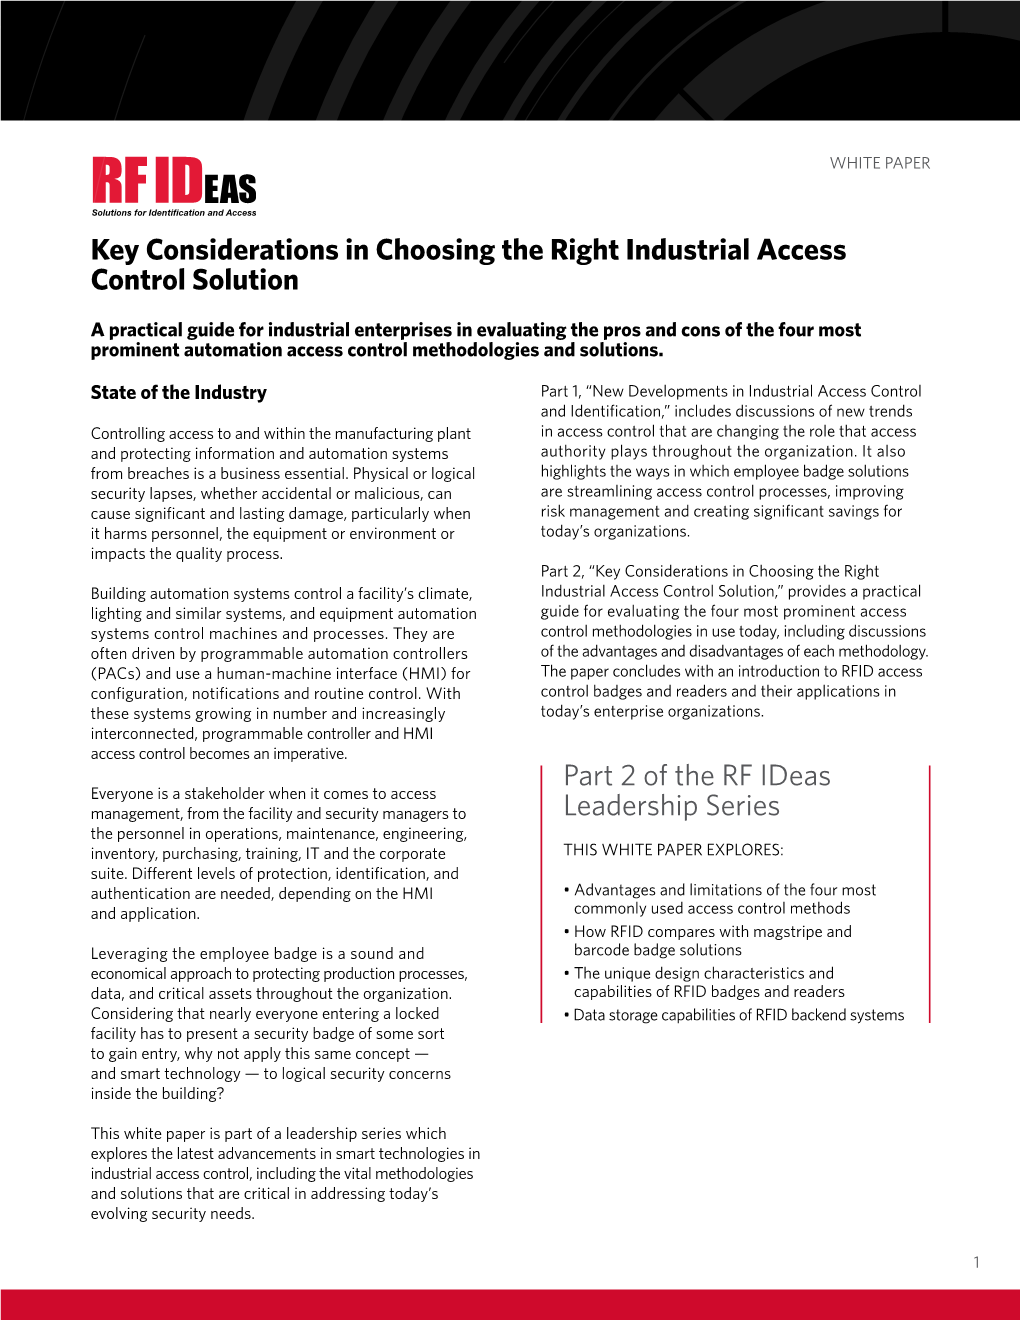 Key Considerations in Choosing the Right Industrial Access Control Solution